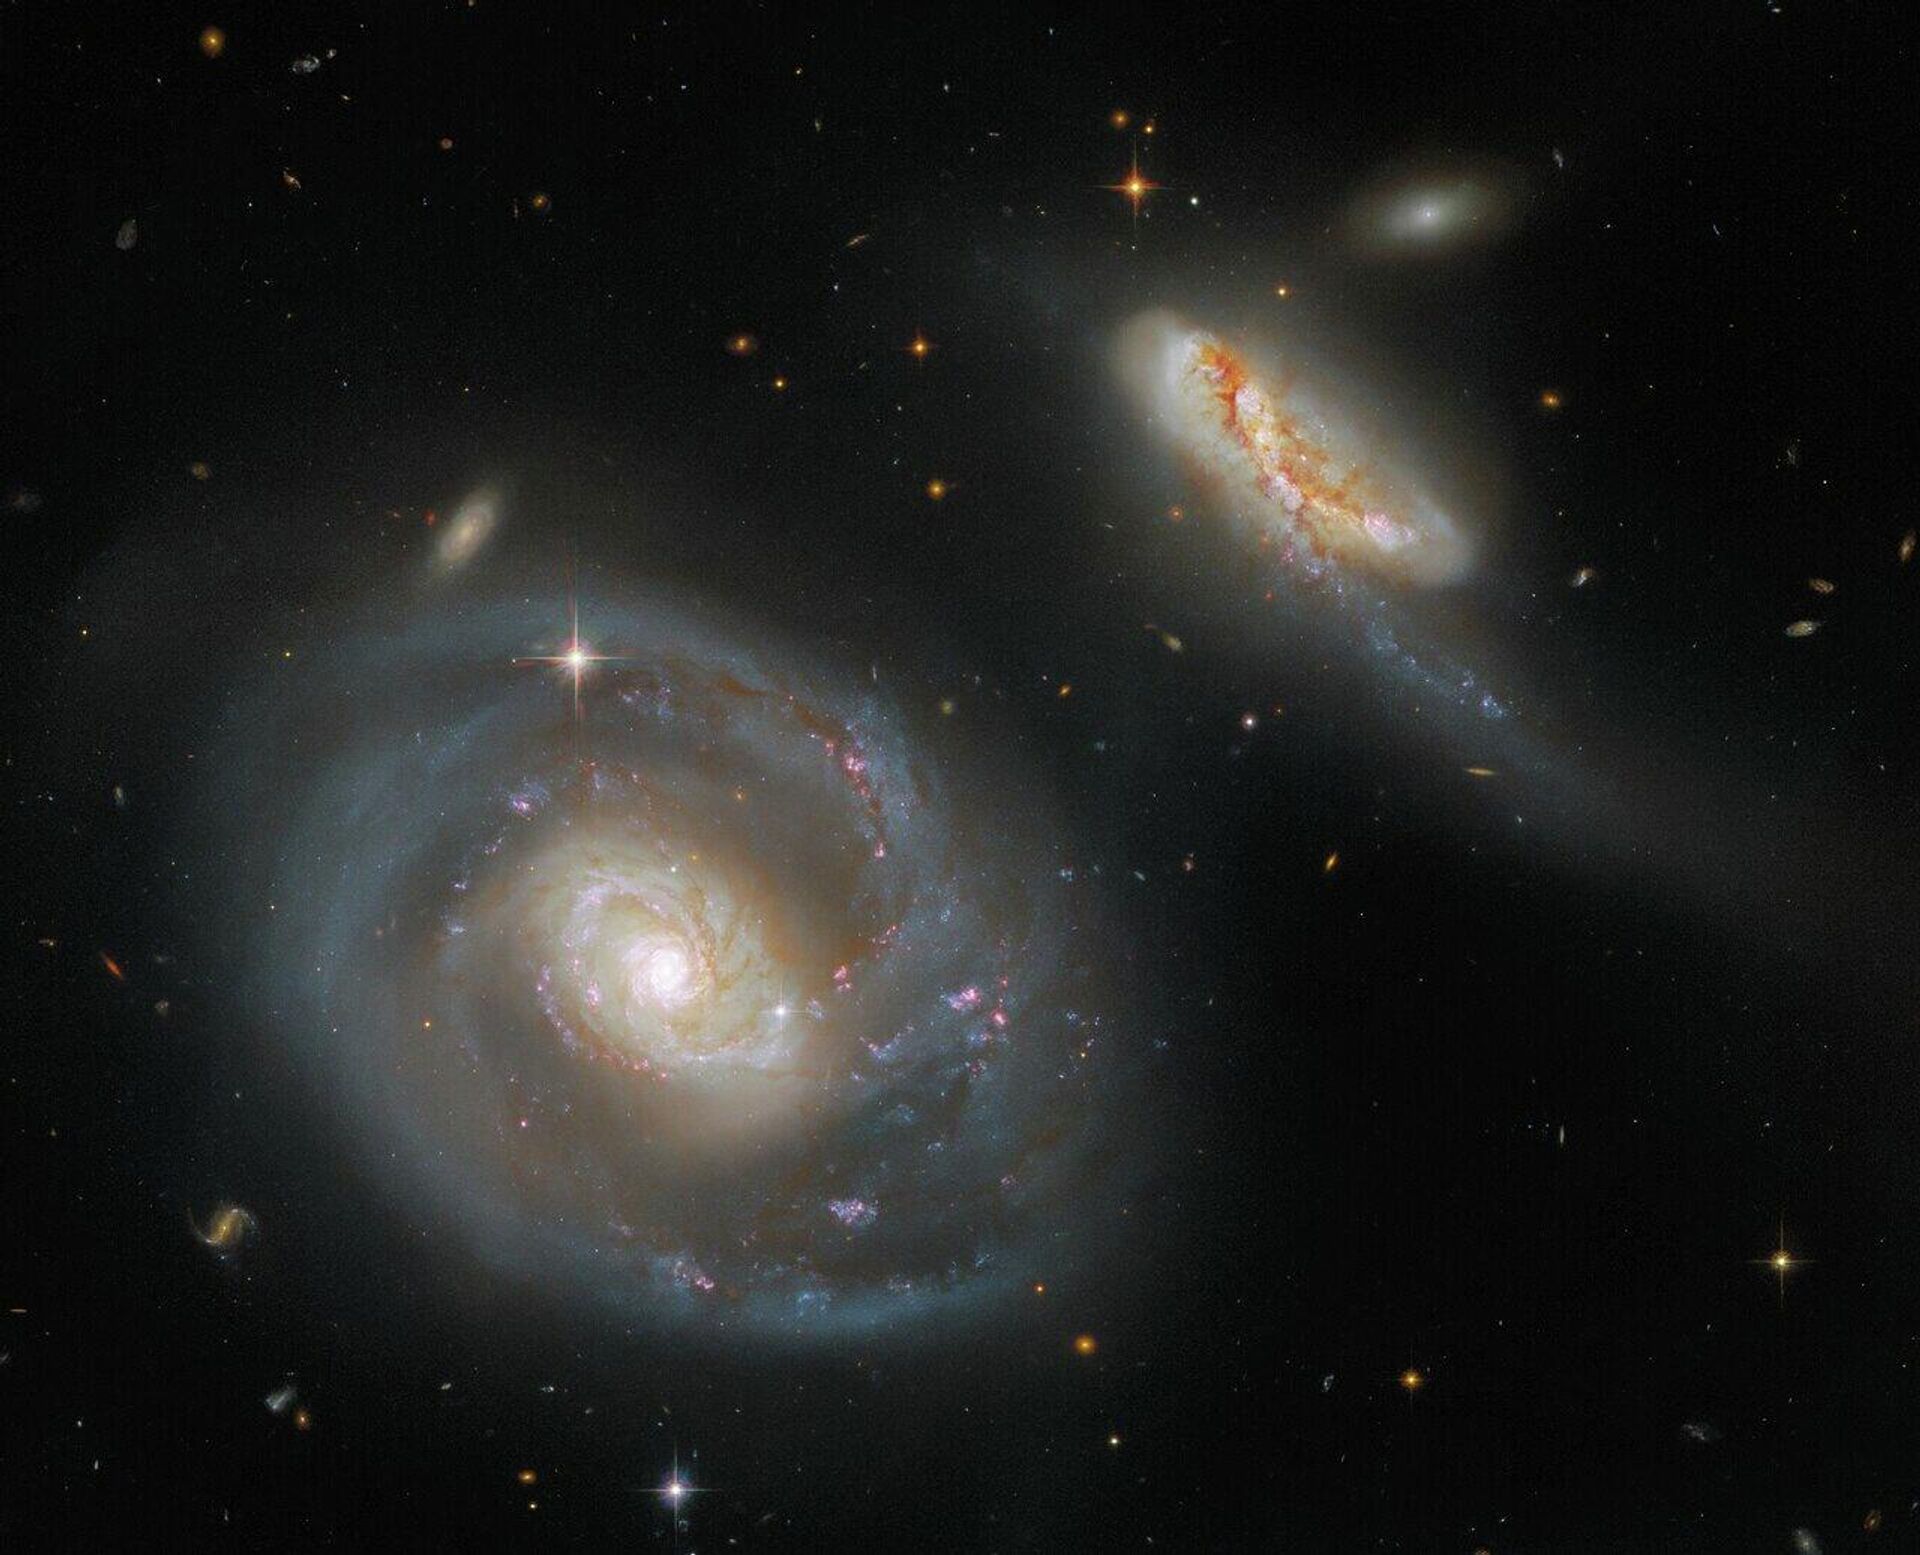 This striking image from the NASA/ESA Hubble Space Telescope showcases Arp 298, a stunning pair of interacting galaxies. Arp 298 — which comprises the two galaxies NGC 7469 and IC 5283 — lies roughly 200 million light-years from Earth in the constellation Pegasus. The larger of the two galaxies pictured here is the barred spiral galaxy NGC 7469, and IC 5283 is its diminutive companion. - Sputnik International, 1920, 24.02.2022